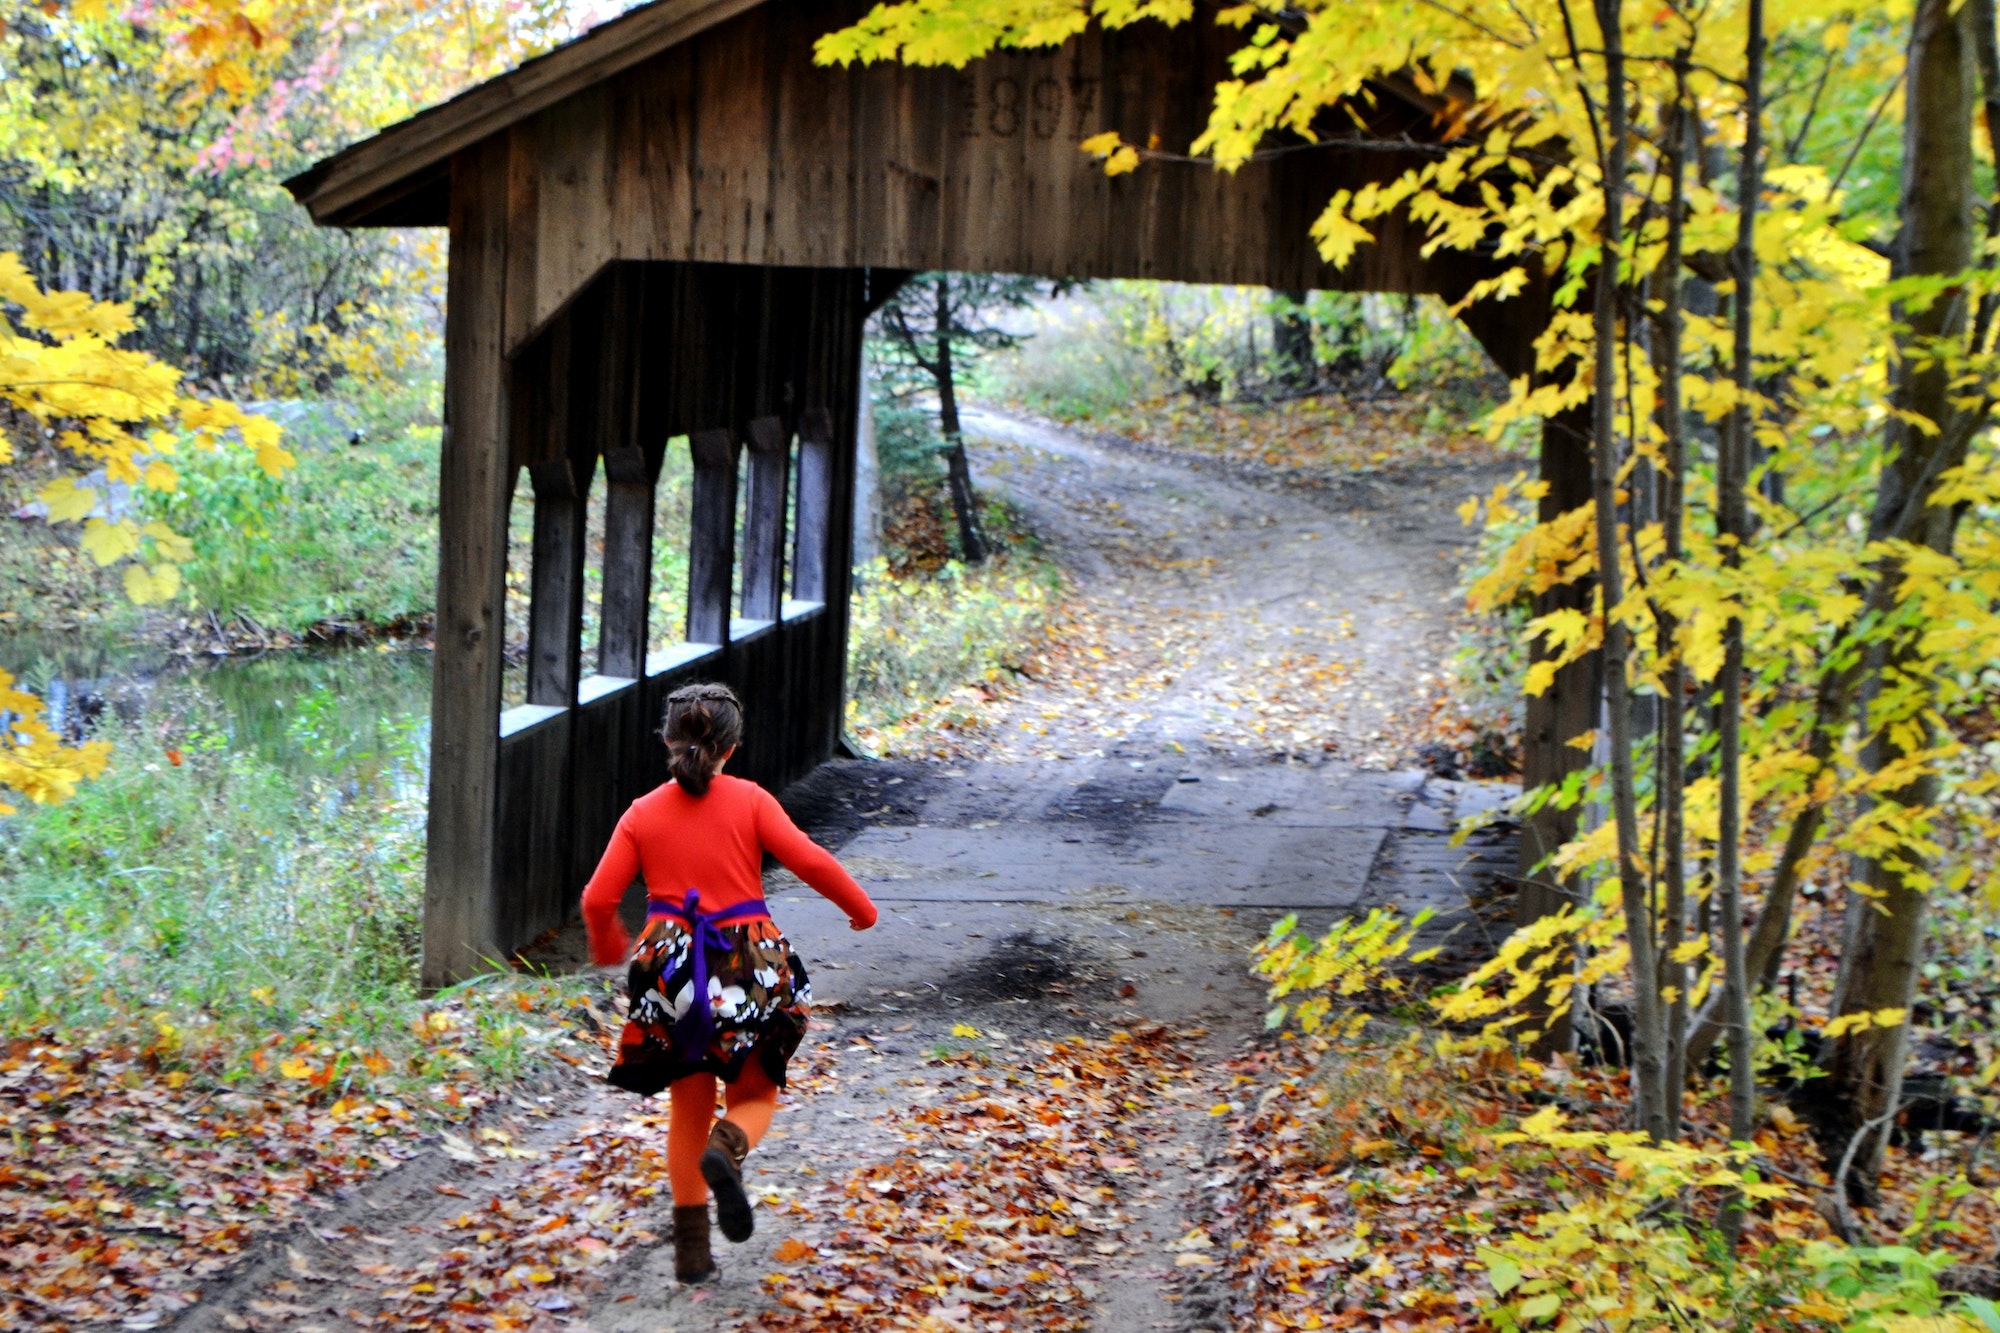 Young girl running towards a wooden covered bridge in the Fall